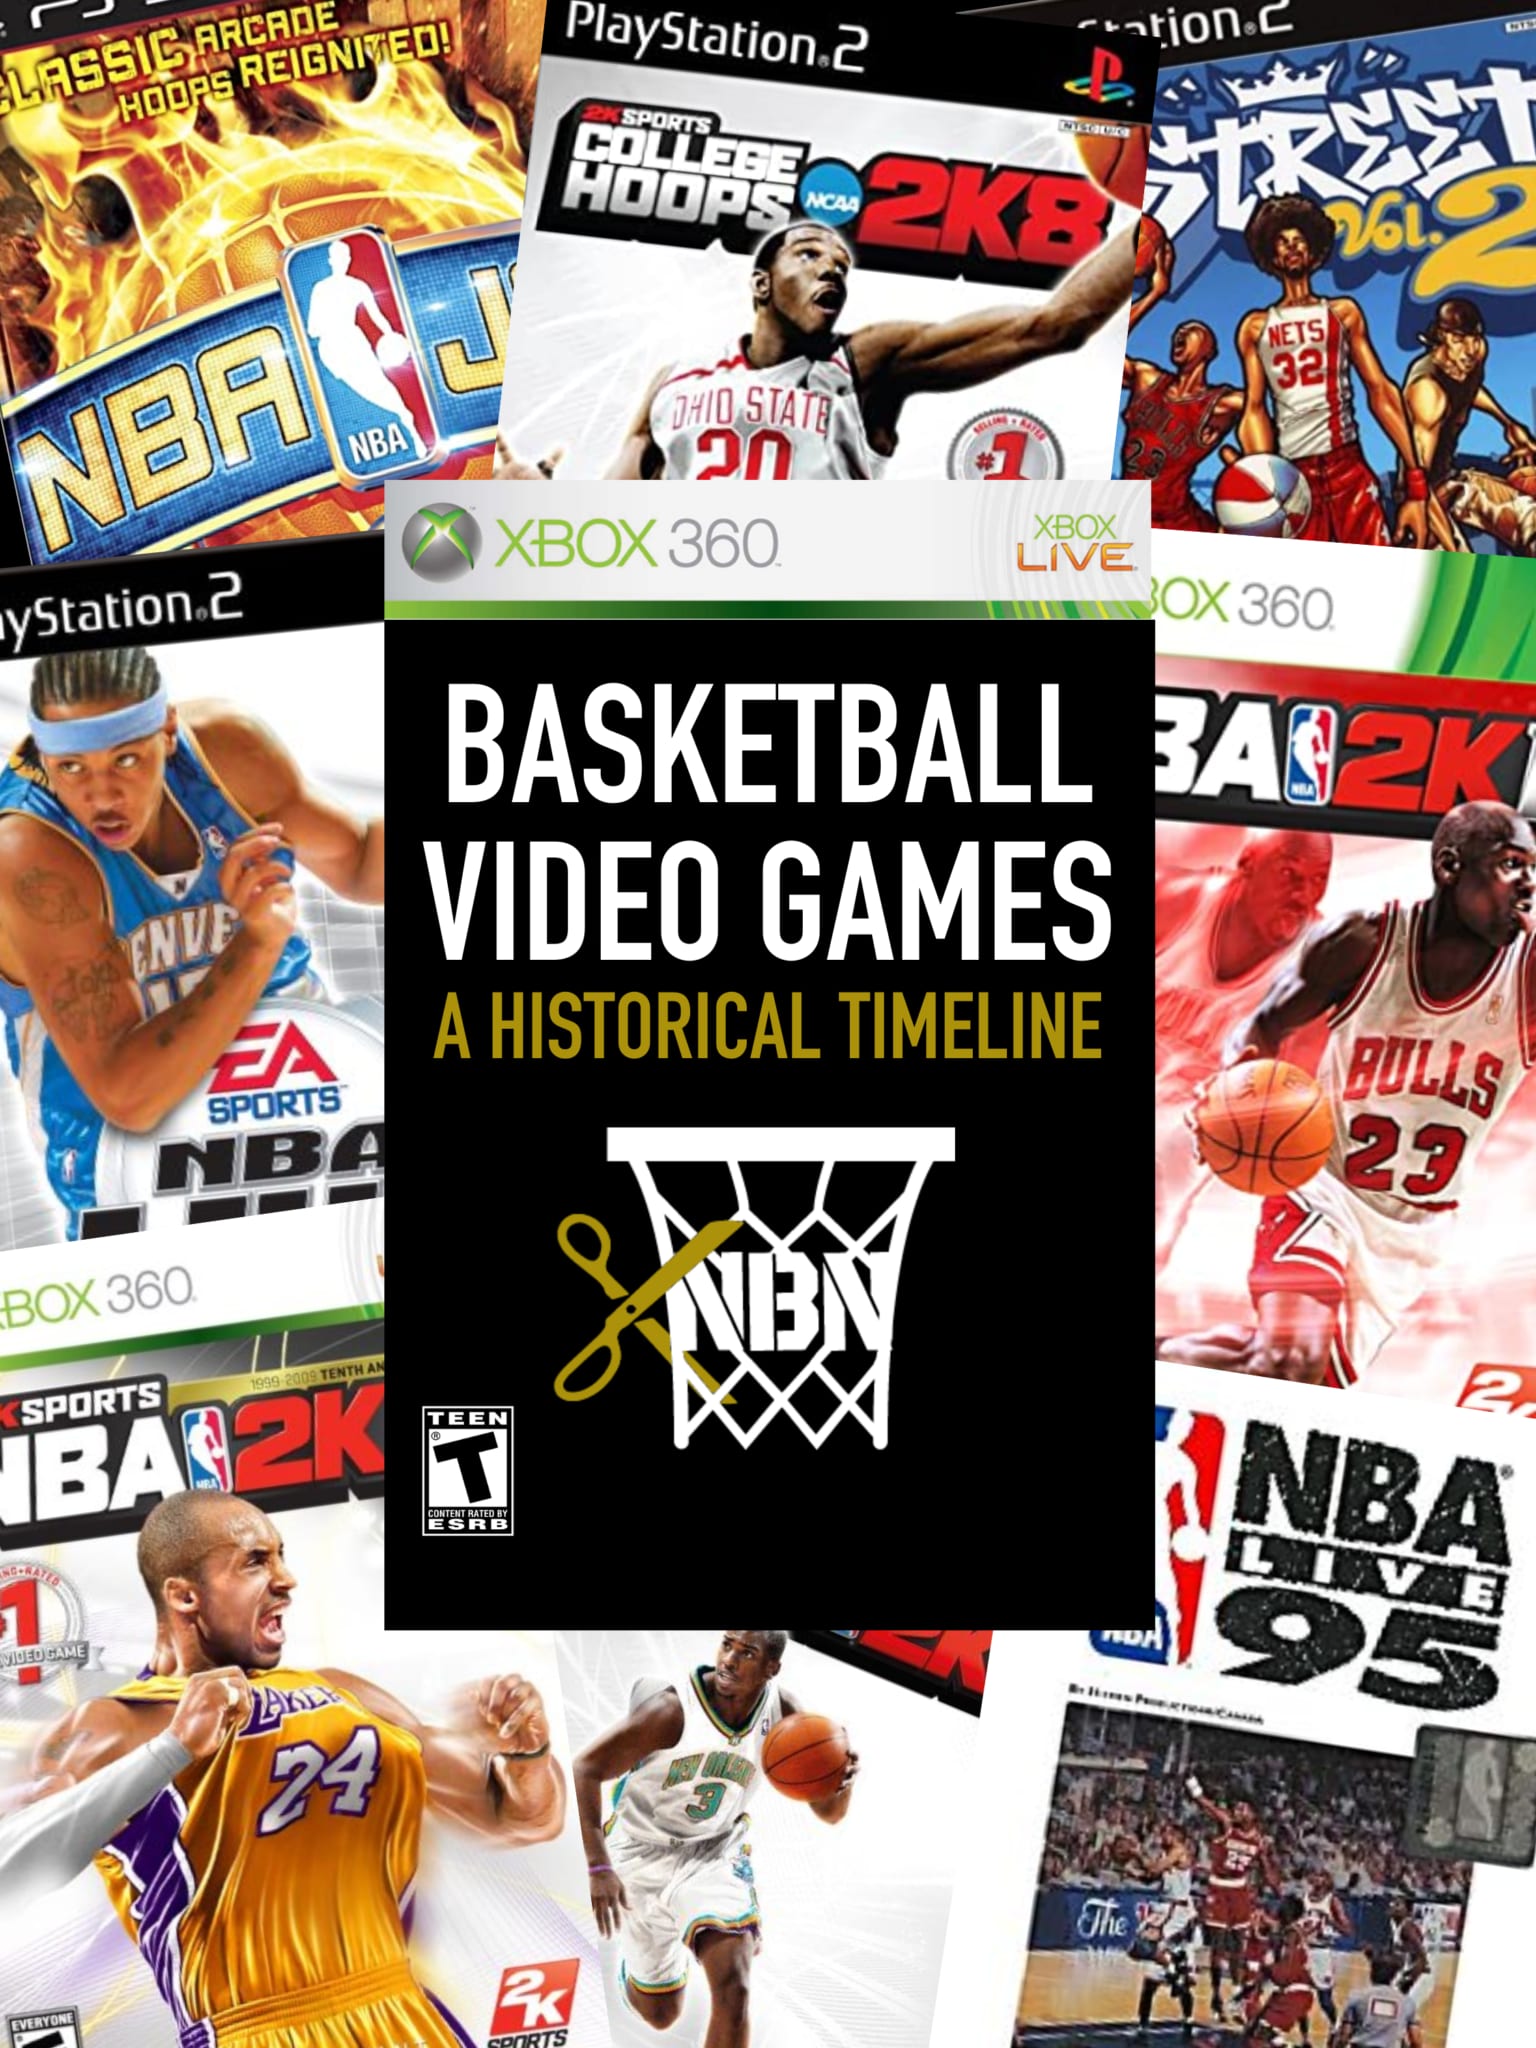 Basketball Video Games A Historical Timeline